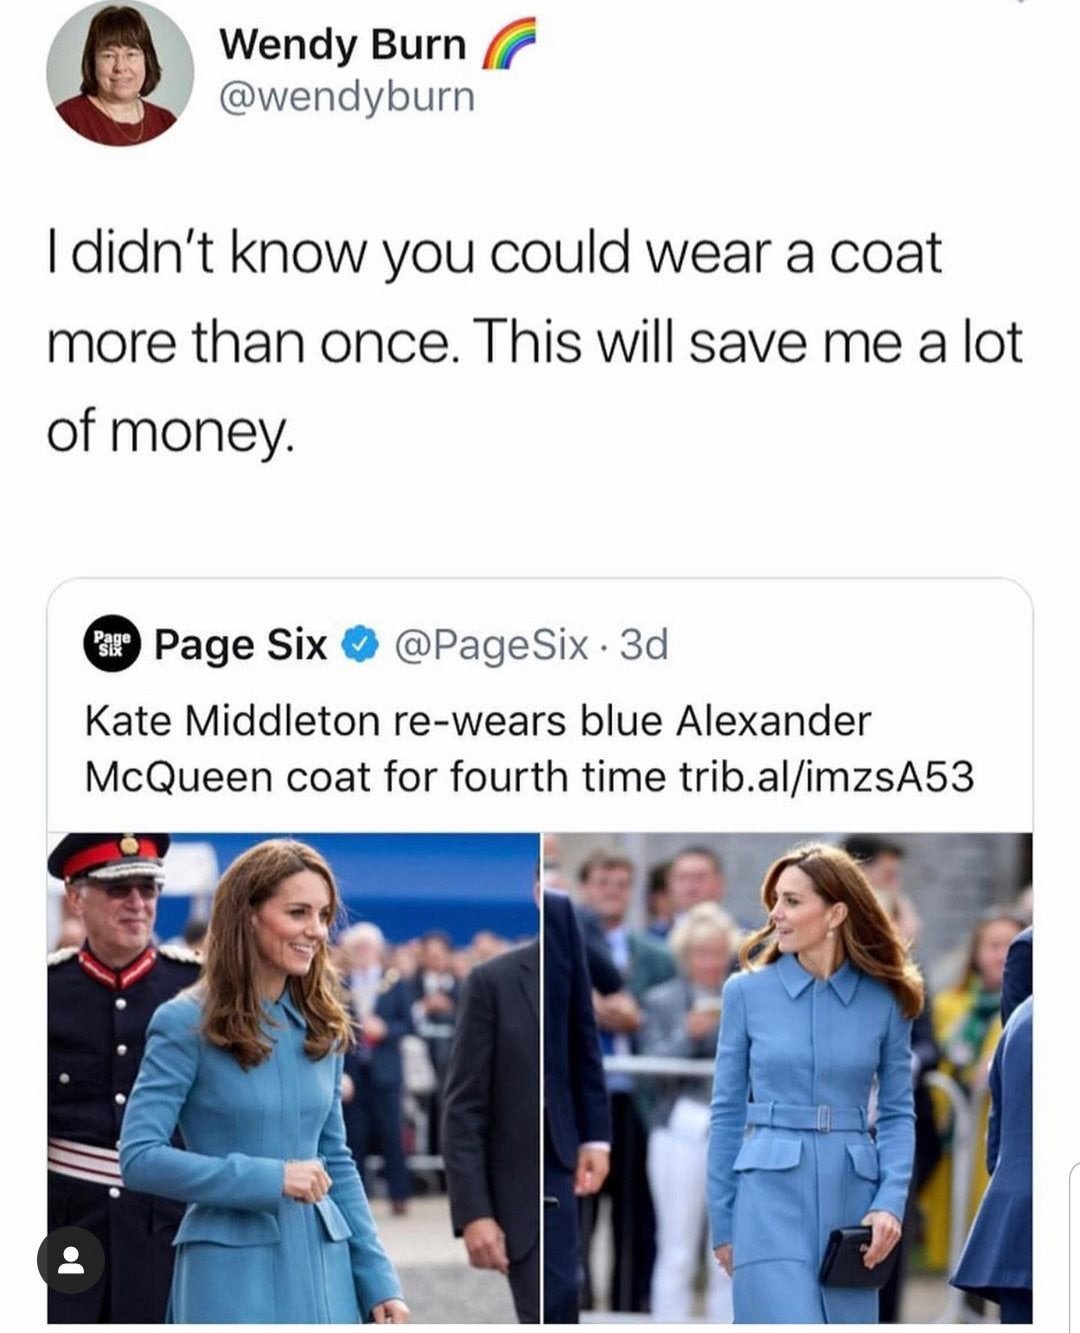 Meme - Wendy Burn I didn't know you could wear a coat more than once. This will save me a lot of money. Par Page Six . 3d Kate Middleton rewears blue Alexander McQueen coat for fourth time trib.alimzsA53